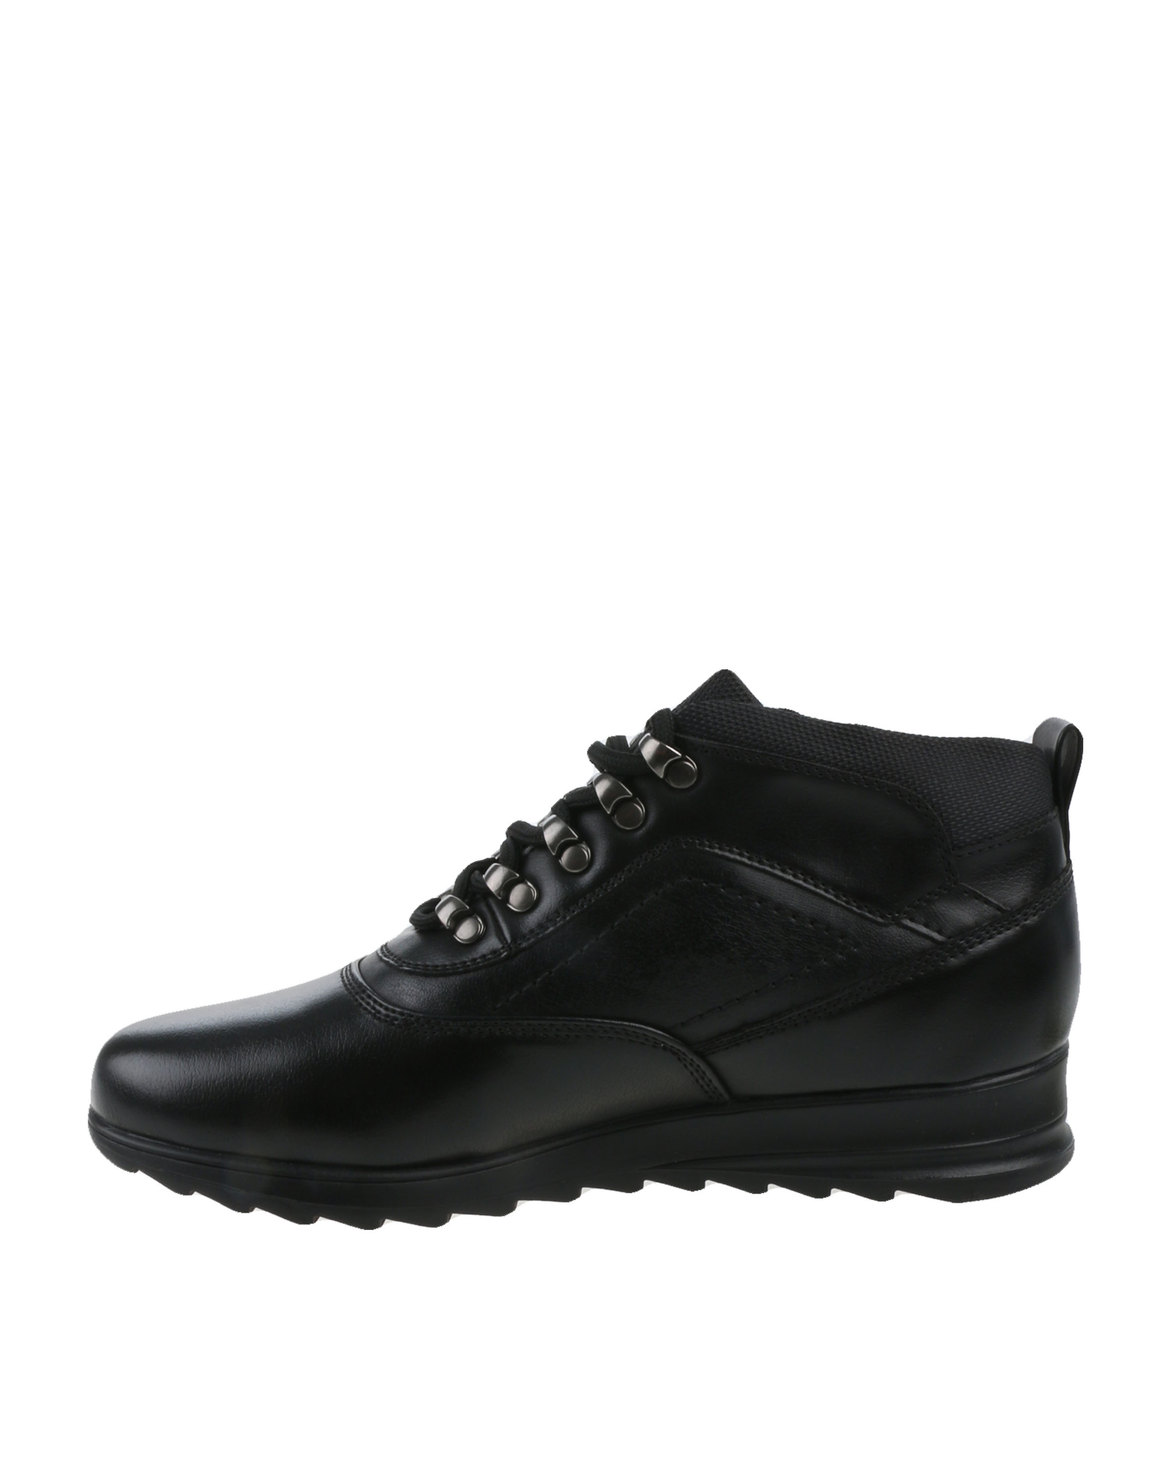 Paul of London Casual Lace Up Ankle Boot Black | Zando